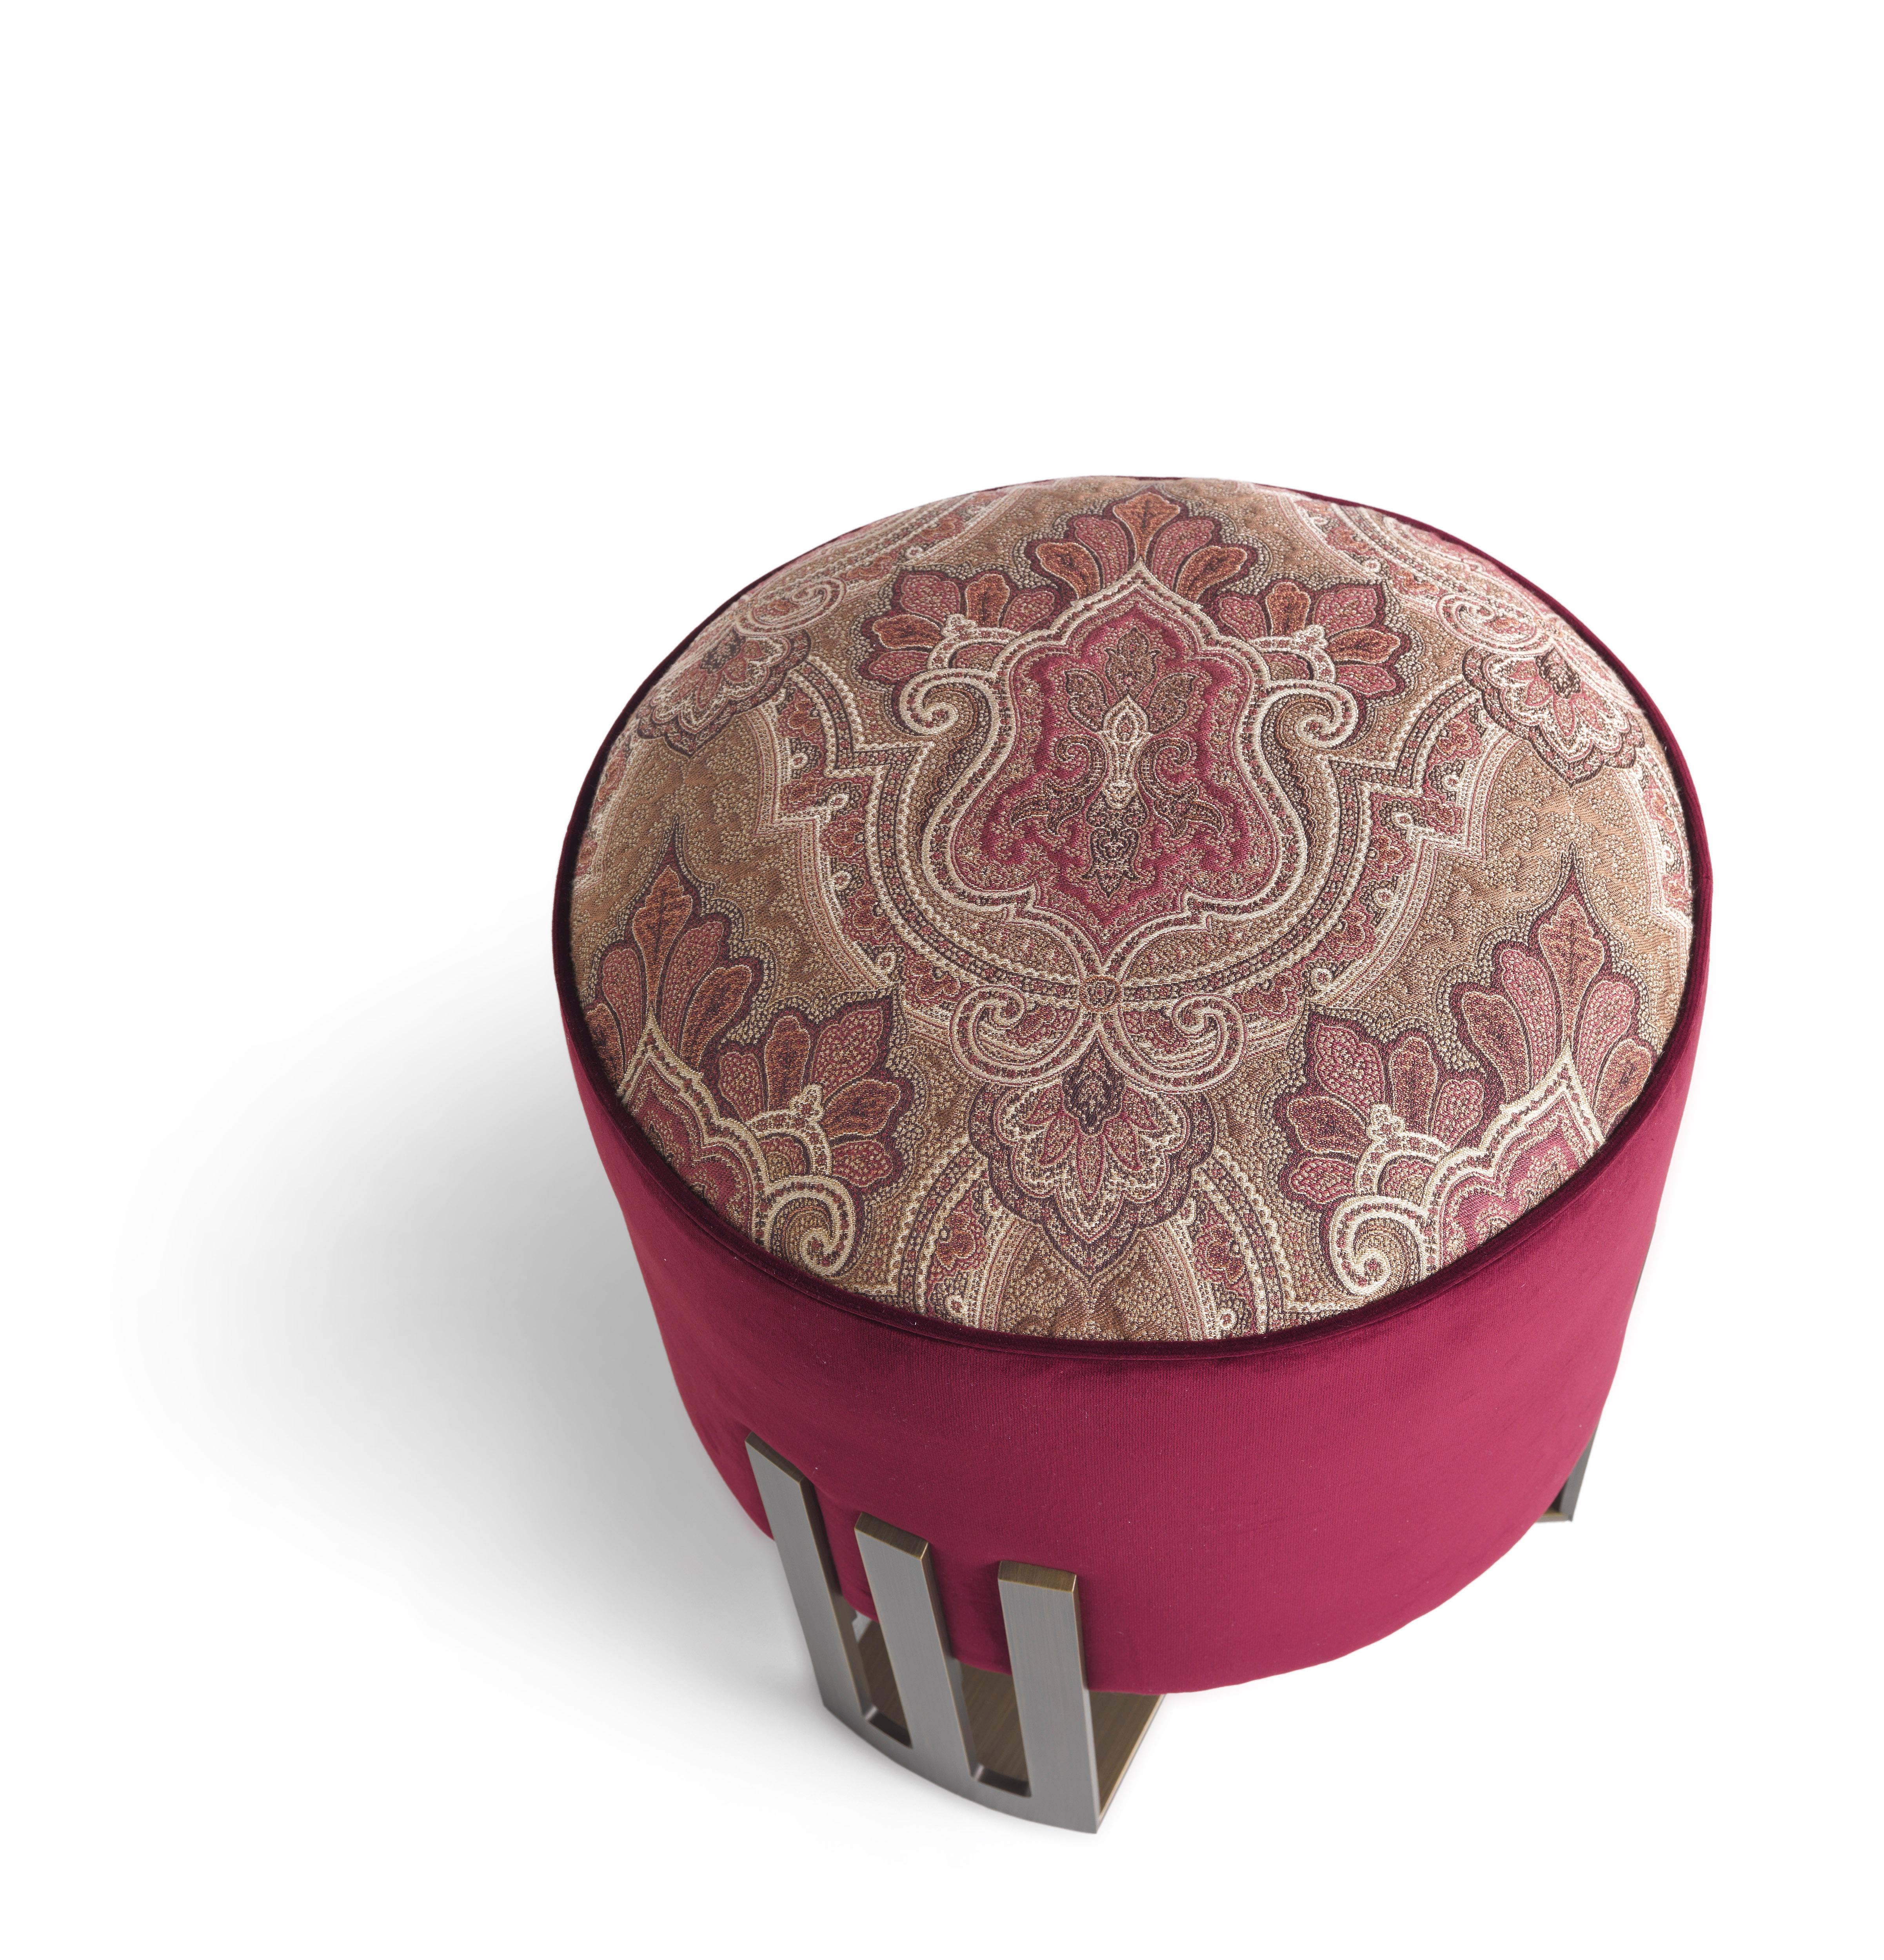 Versatile and compact, the Klee pouf is a superb mix of elements in a perfect Etro Home Interiors style. The upholstery in typical fabrics of the collection, with Paisley motif or Suzani pattern, combined with the refinement of the metal structure